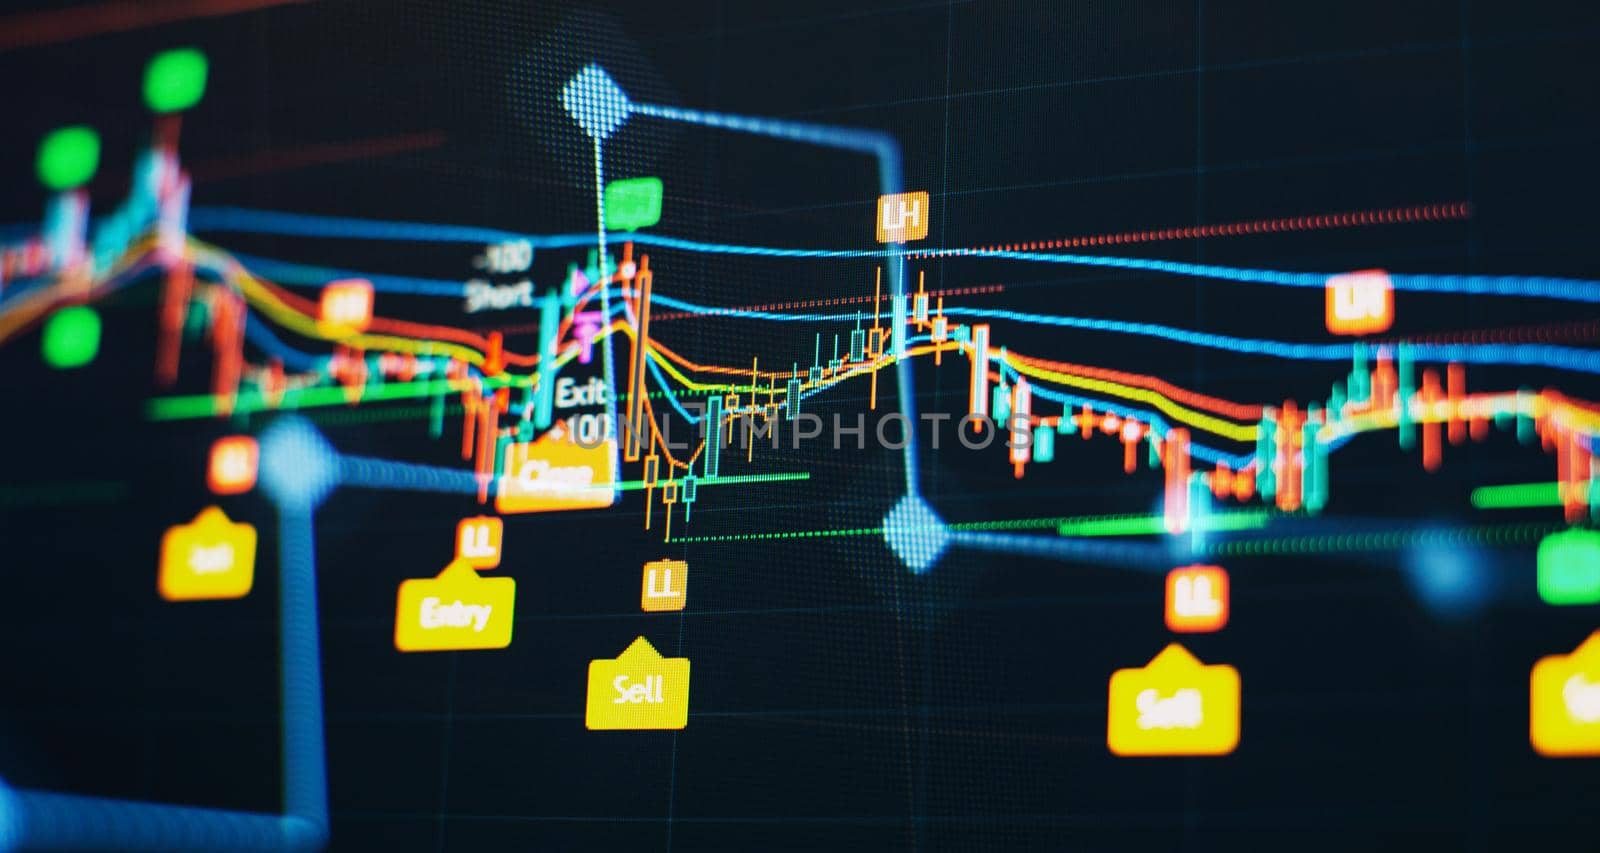 Bar graphs, Diagrams, financial figures. Abstract glowing forex chart interface wallpaper. Investment, trade, stock, finance